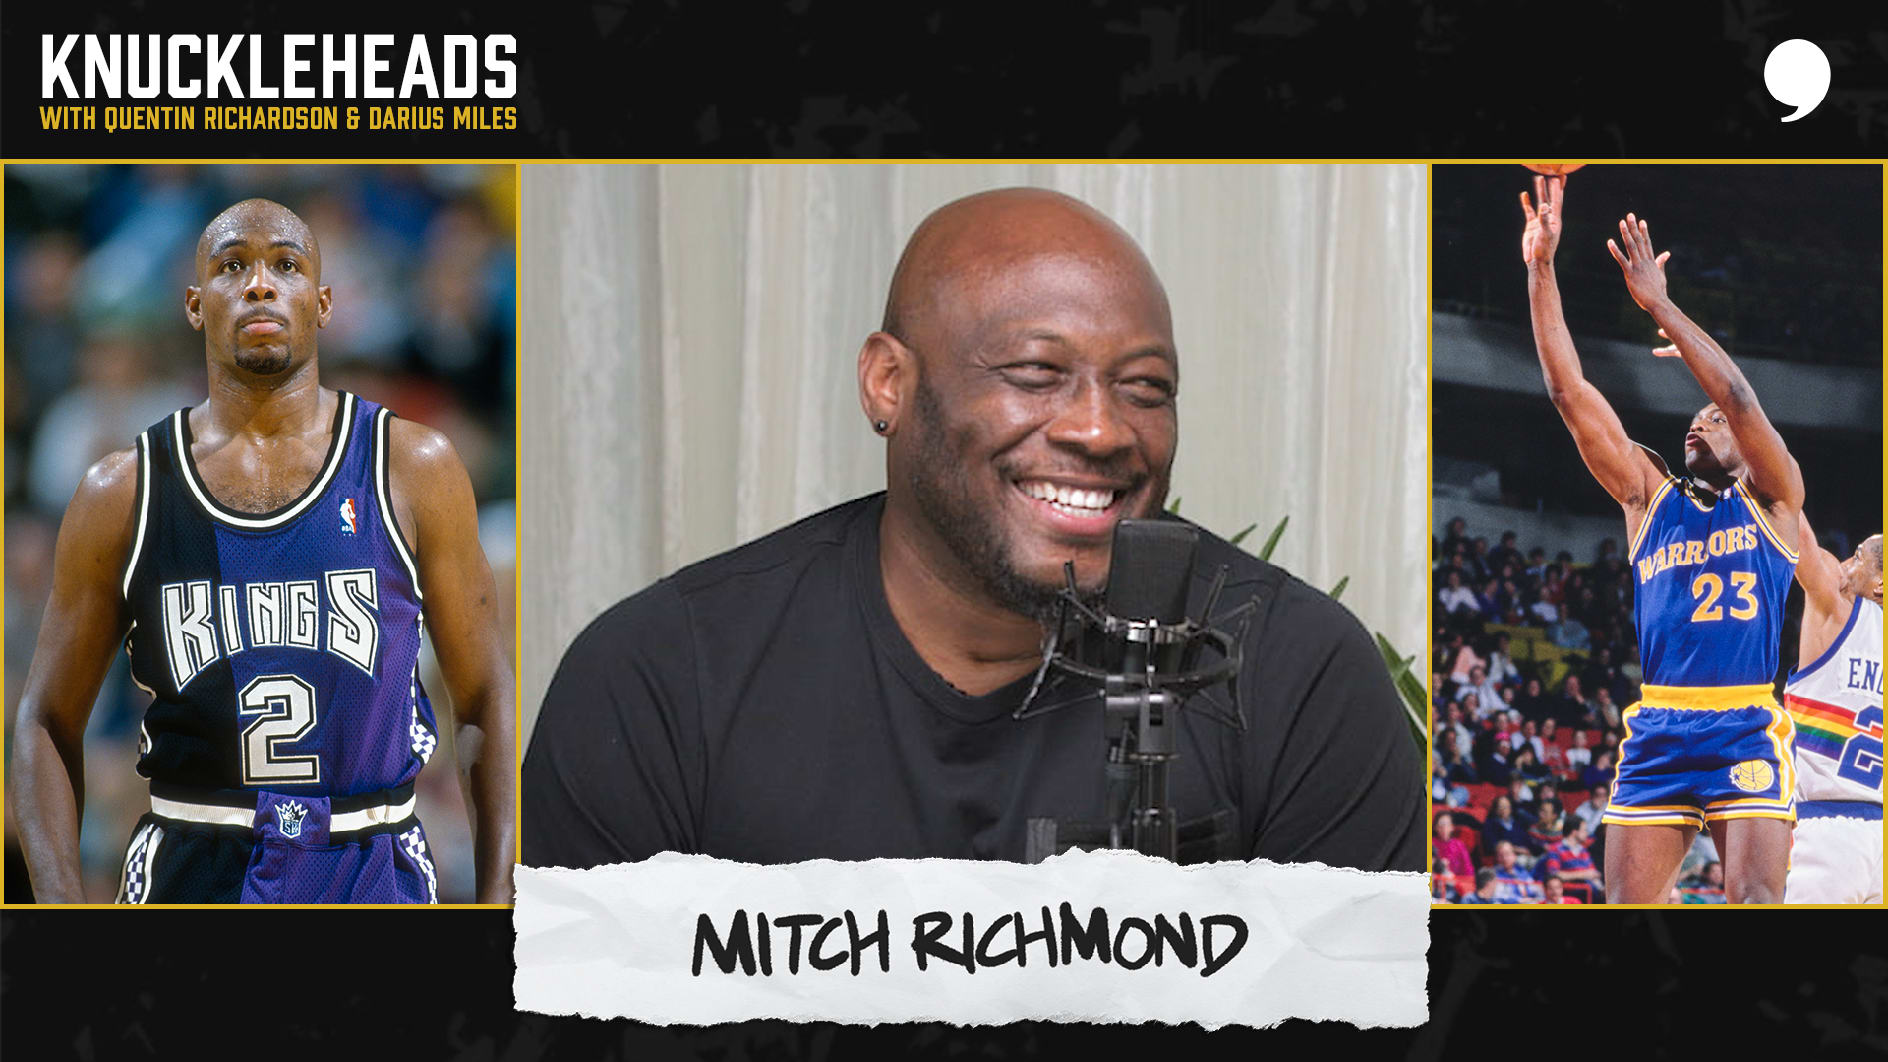 Knuckleheads with Quentin Richardson and Darius Miles - Full